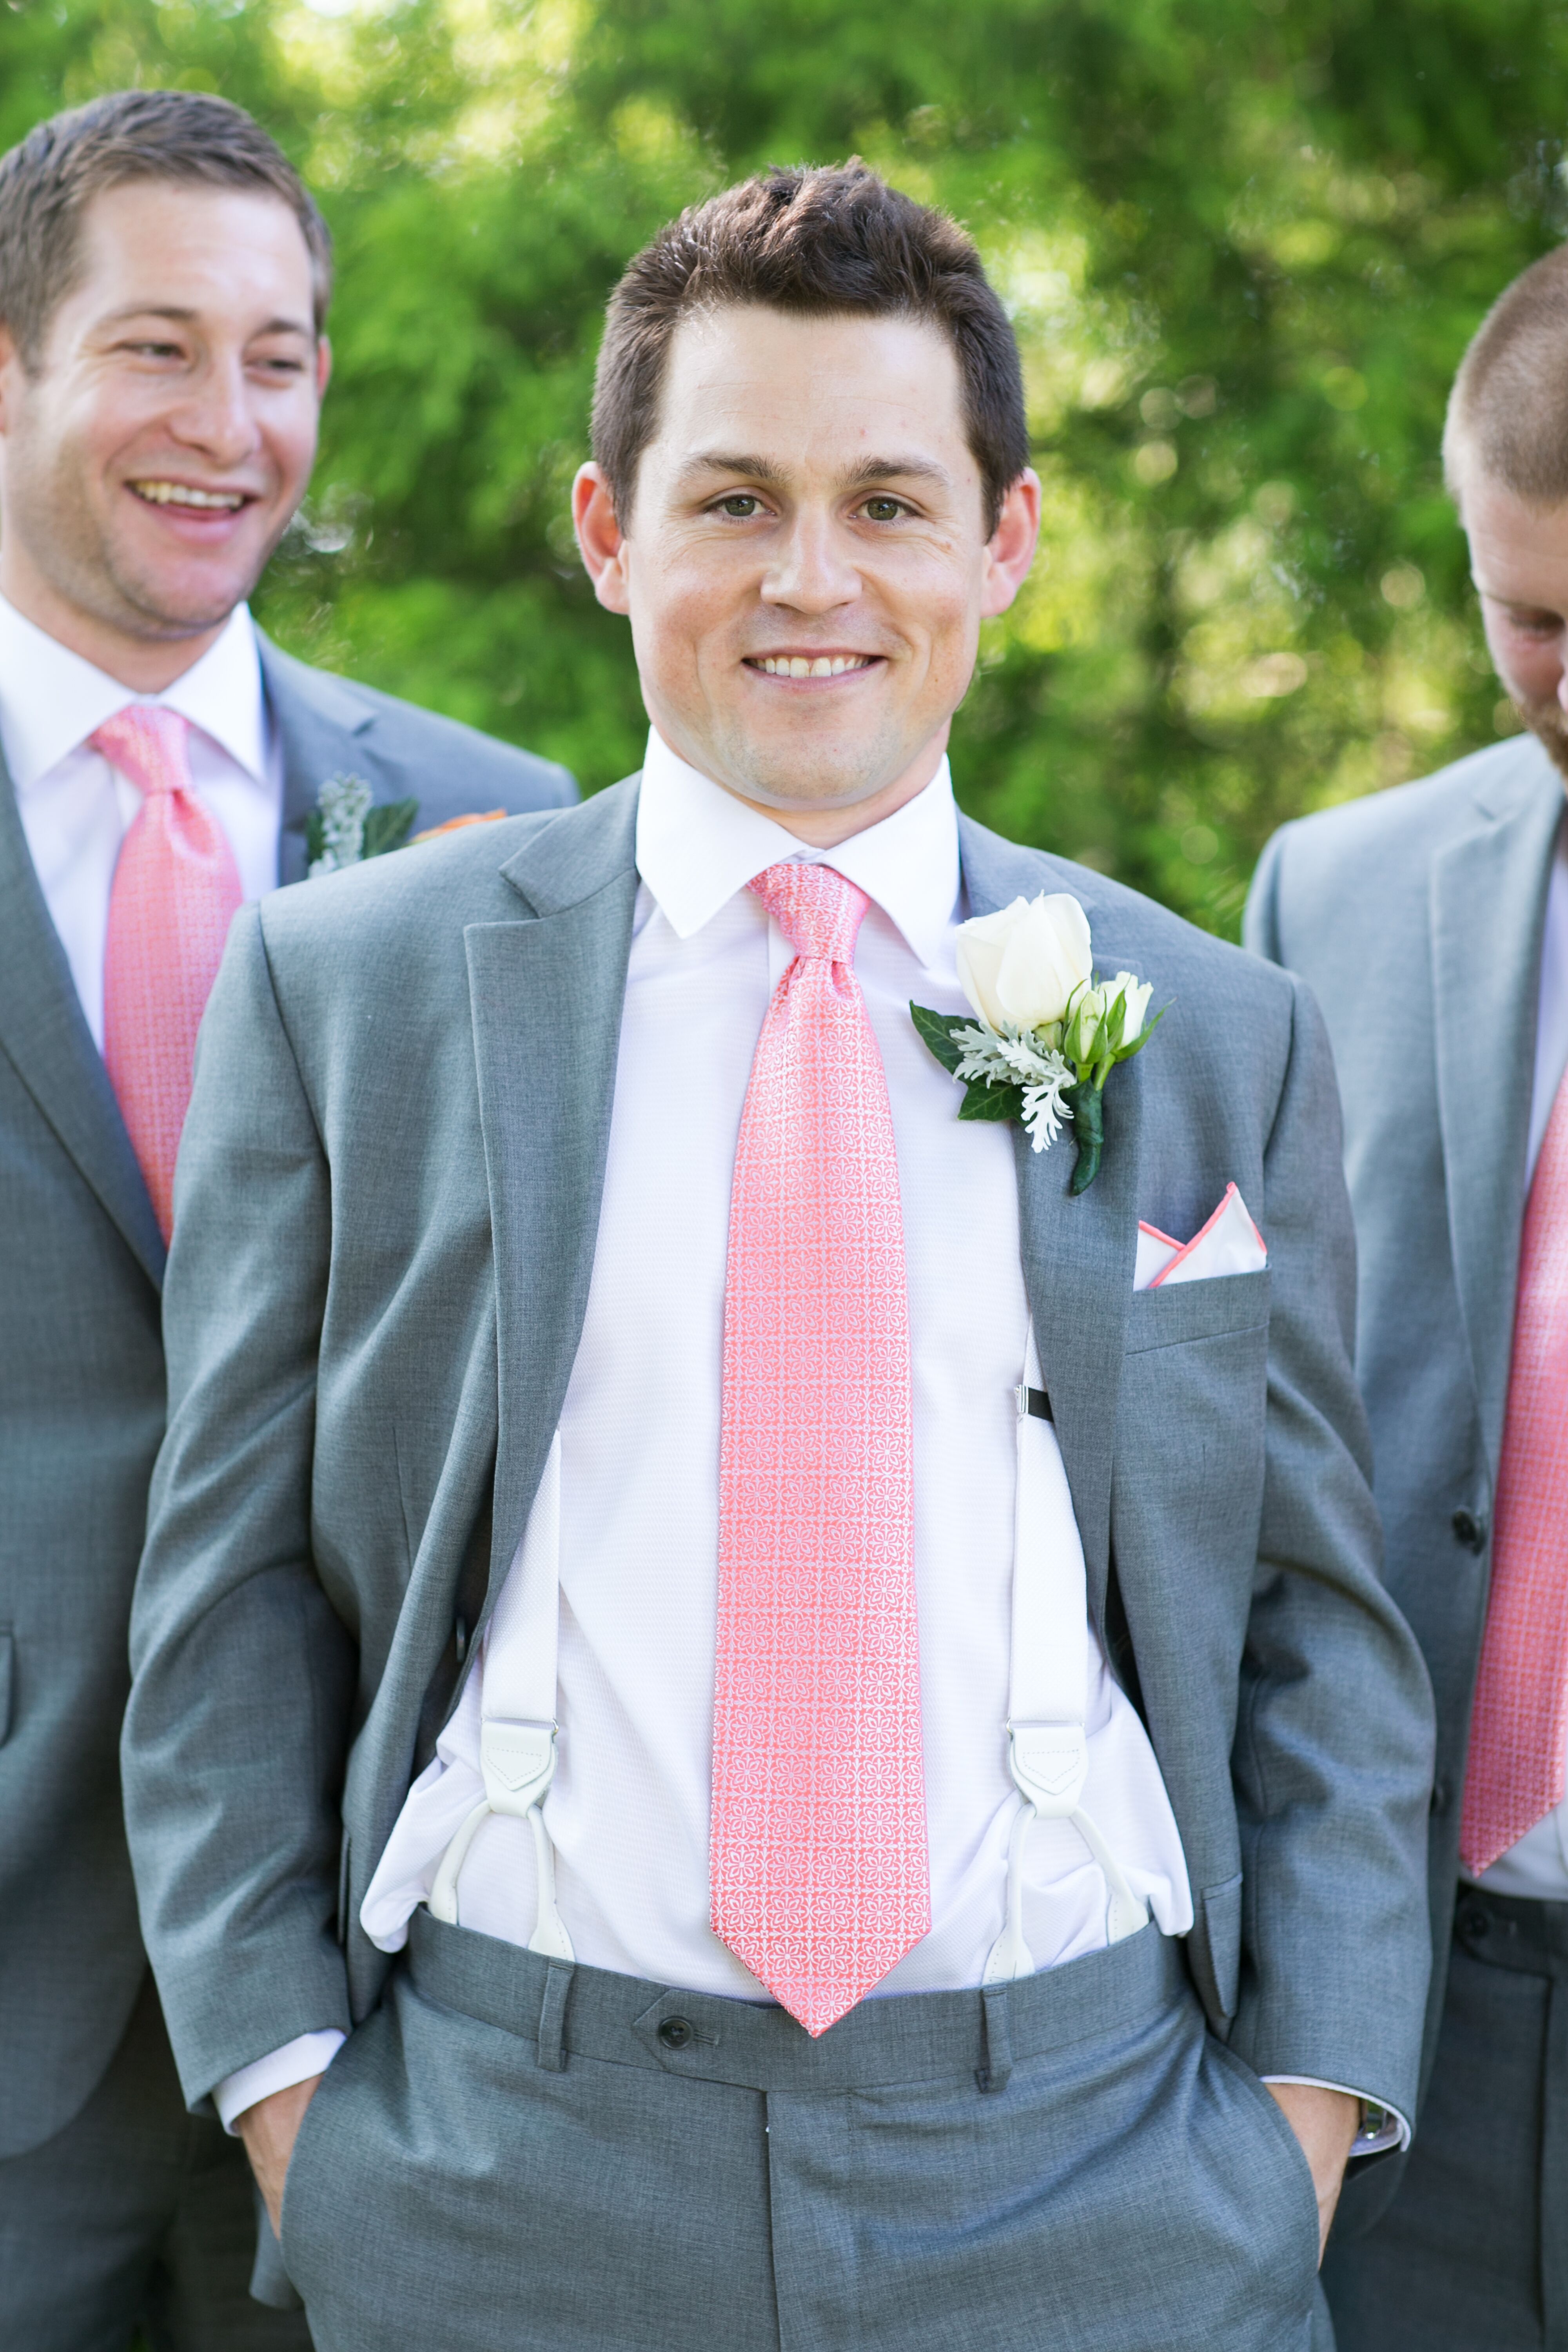 Groom in a Gray Suit and a Pink Tie with Groomsmen